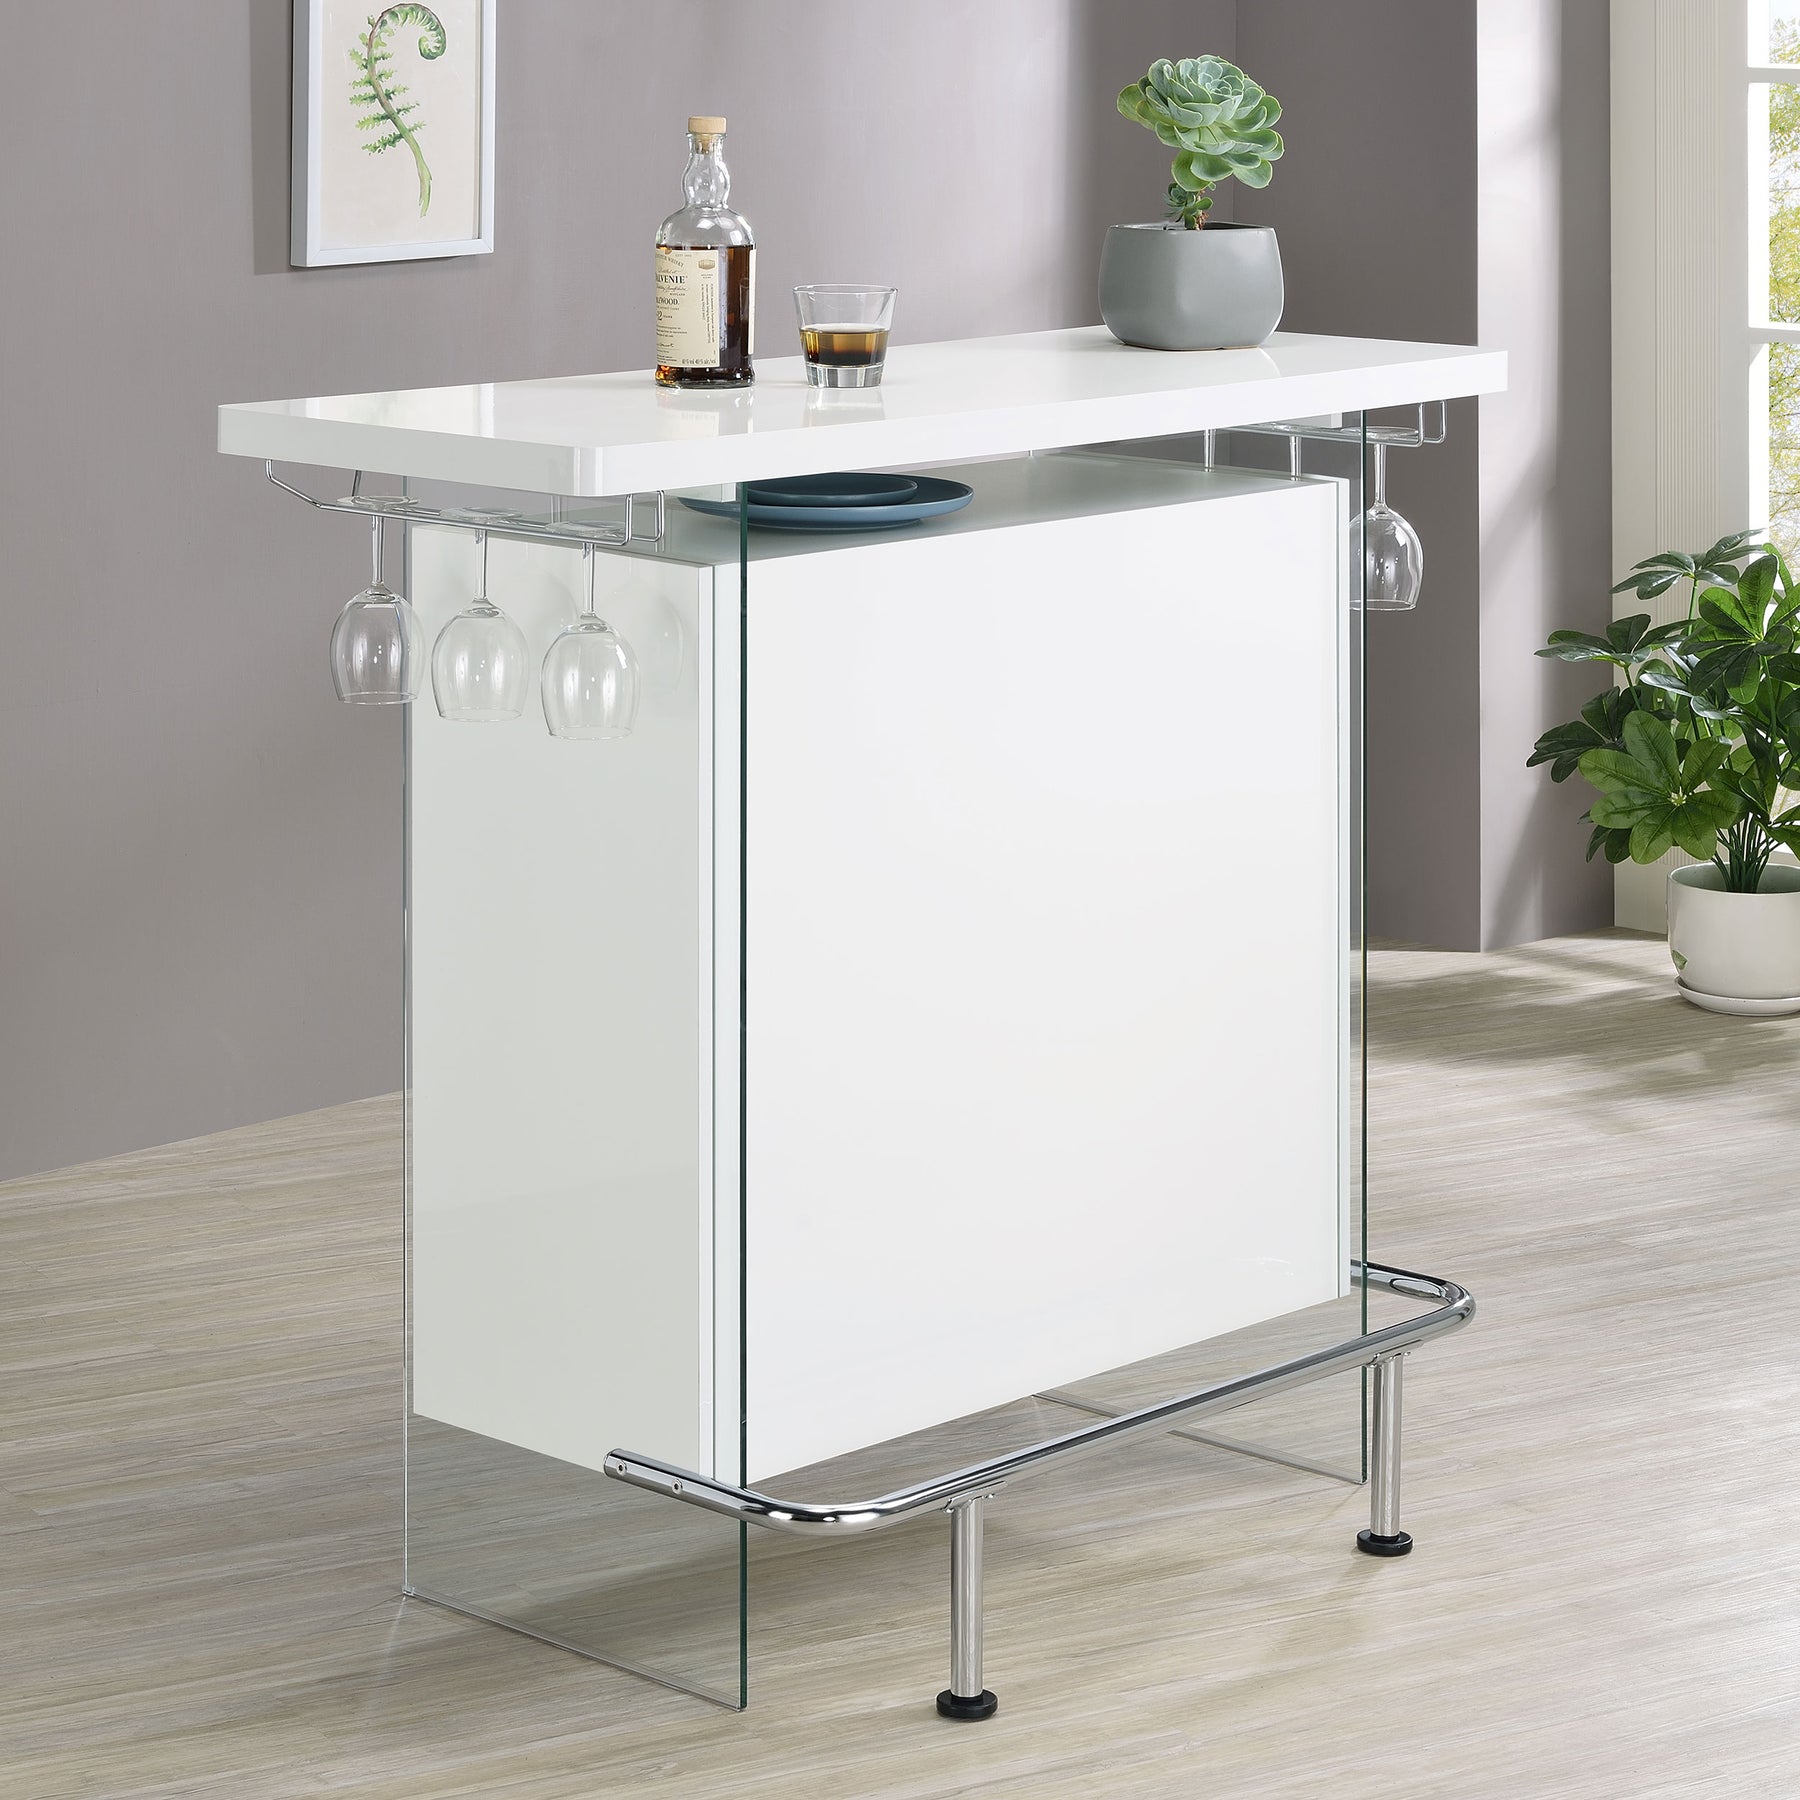 Acosta Rectangular Bar Unit with Footrest and Glass Side Panels - Half Price Furniture